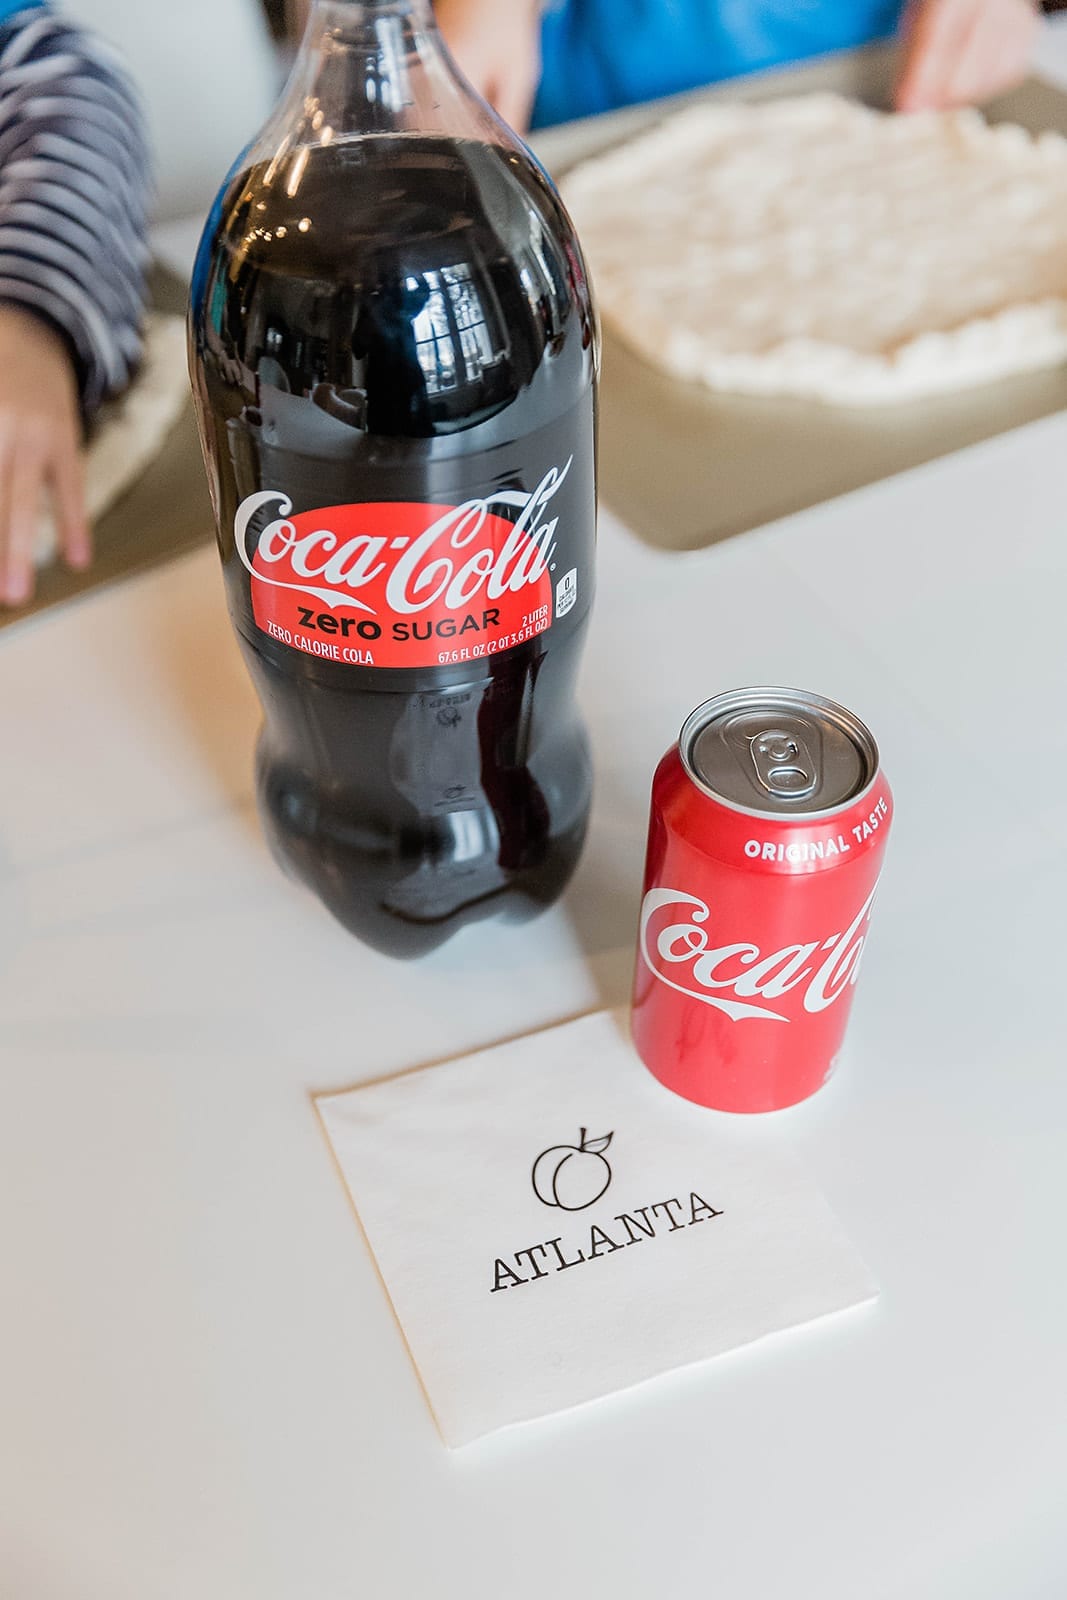 Atlanta Super Bowl Mercedes Stadium. Throw an Atlanta themed party with Coke and Publix for a fun family dinner and celebration!